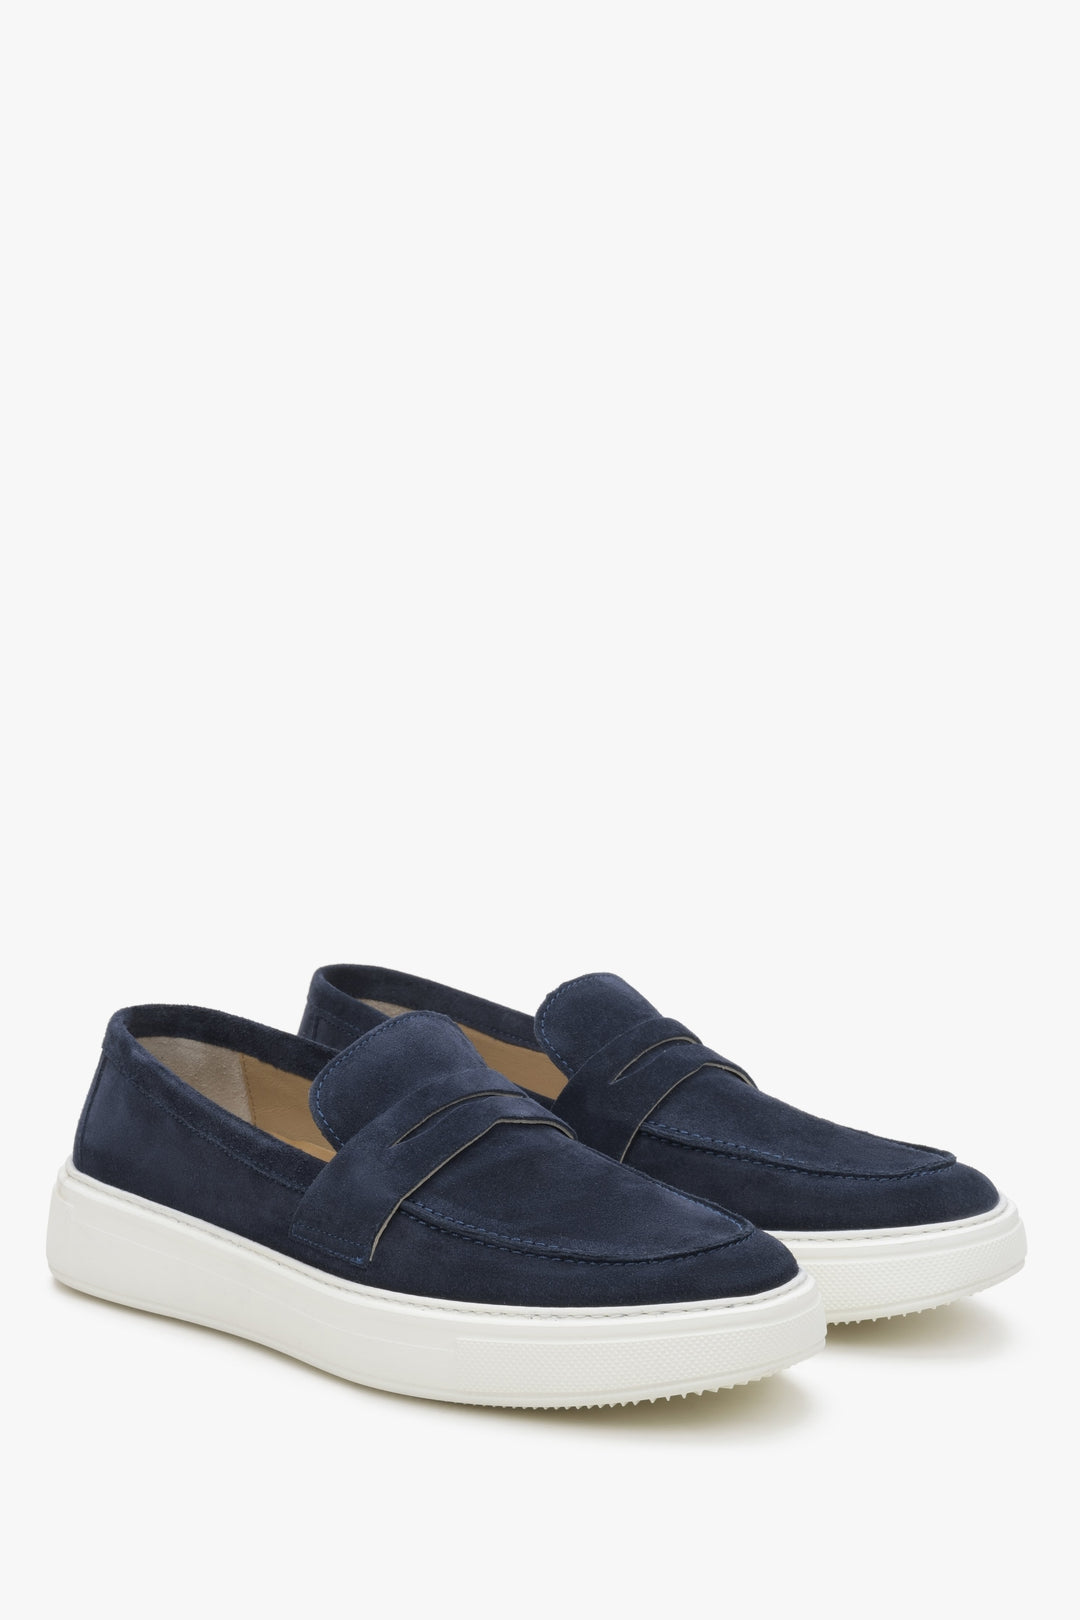 Estro men's navy blue genuine velour moccasins - presentation of the toe and side seam of the shoes.